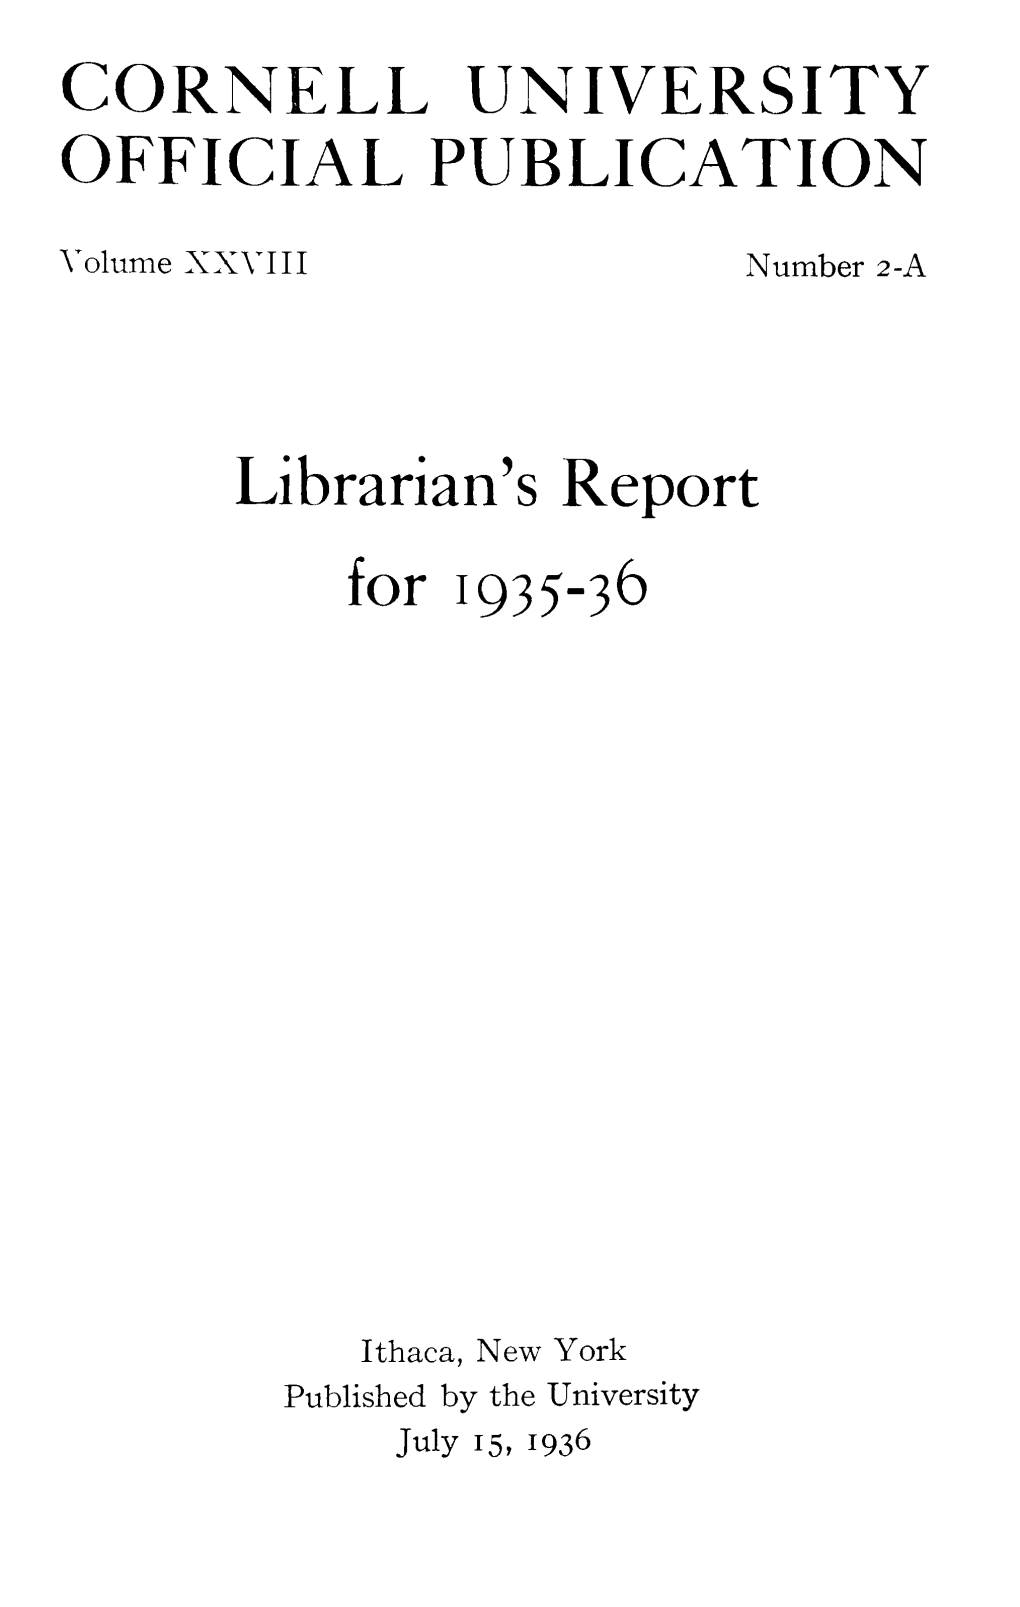 Librarian's Report